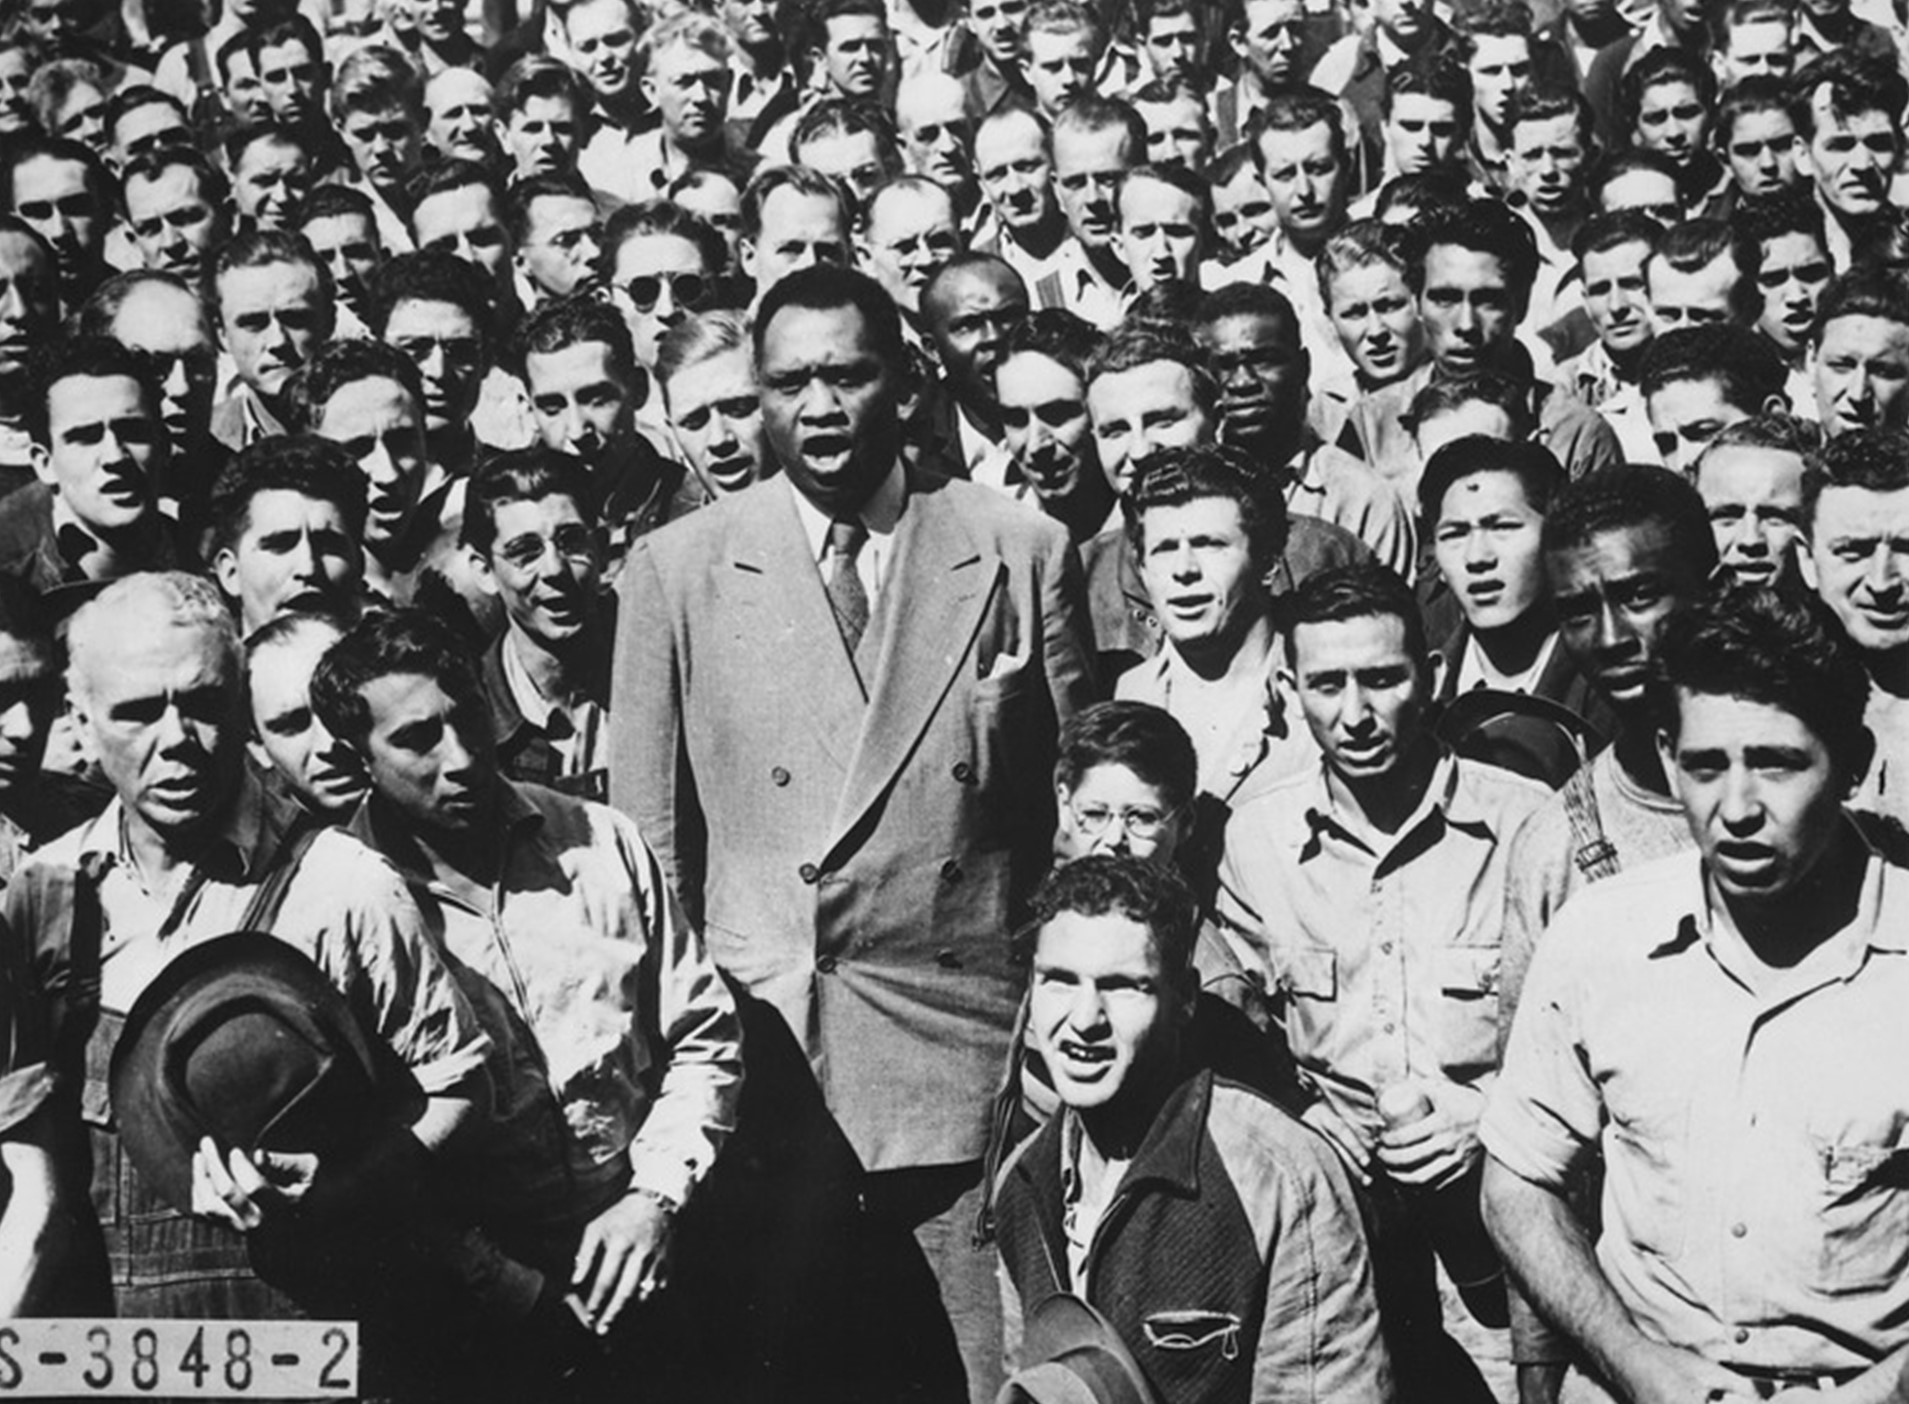 Black and white photo. A singing Paul Robeson stands tall in the foreground of this photo, surrounded by a crowd of all-male shipyard workers. Robeson wears a double-breasted, light-colored wool suit; both he and the shipyard workers are hatless.